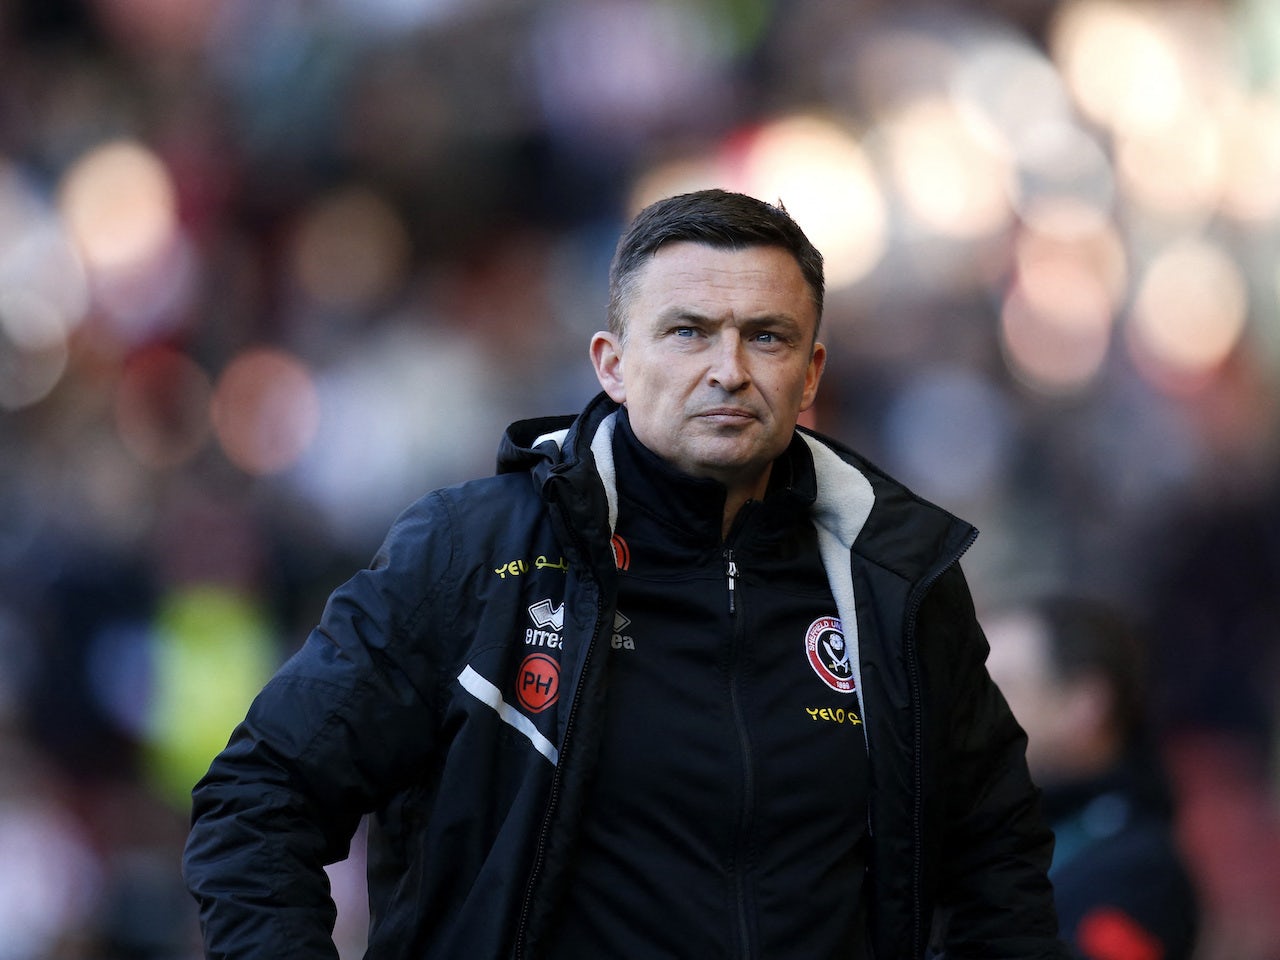 Where Sheffield United are tipped to finish in the 2021/22